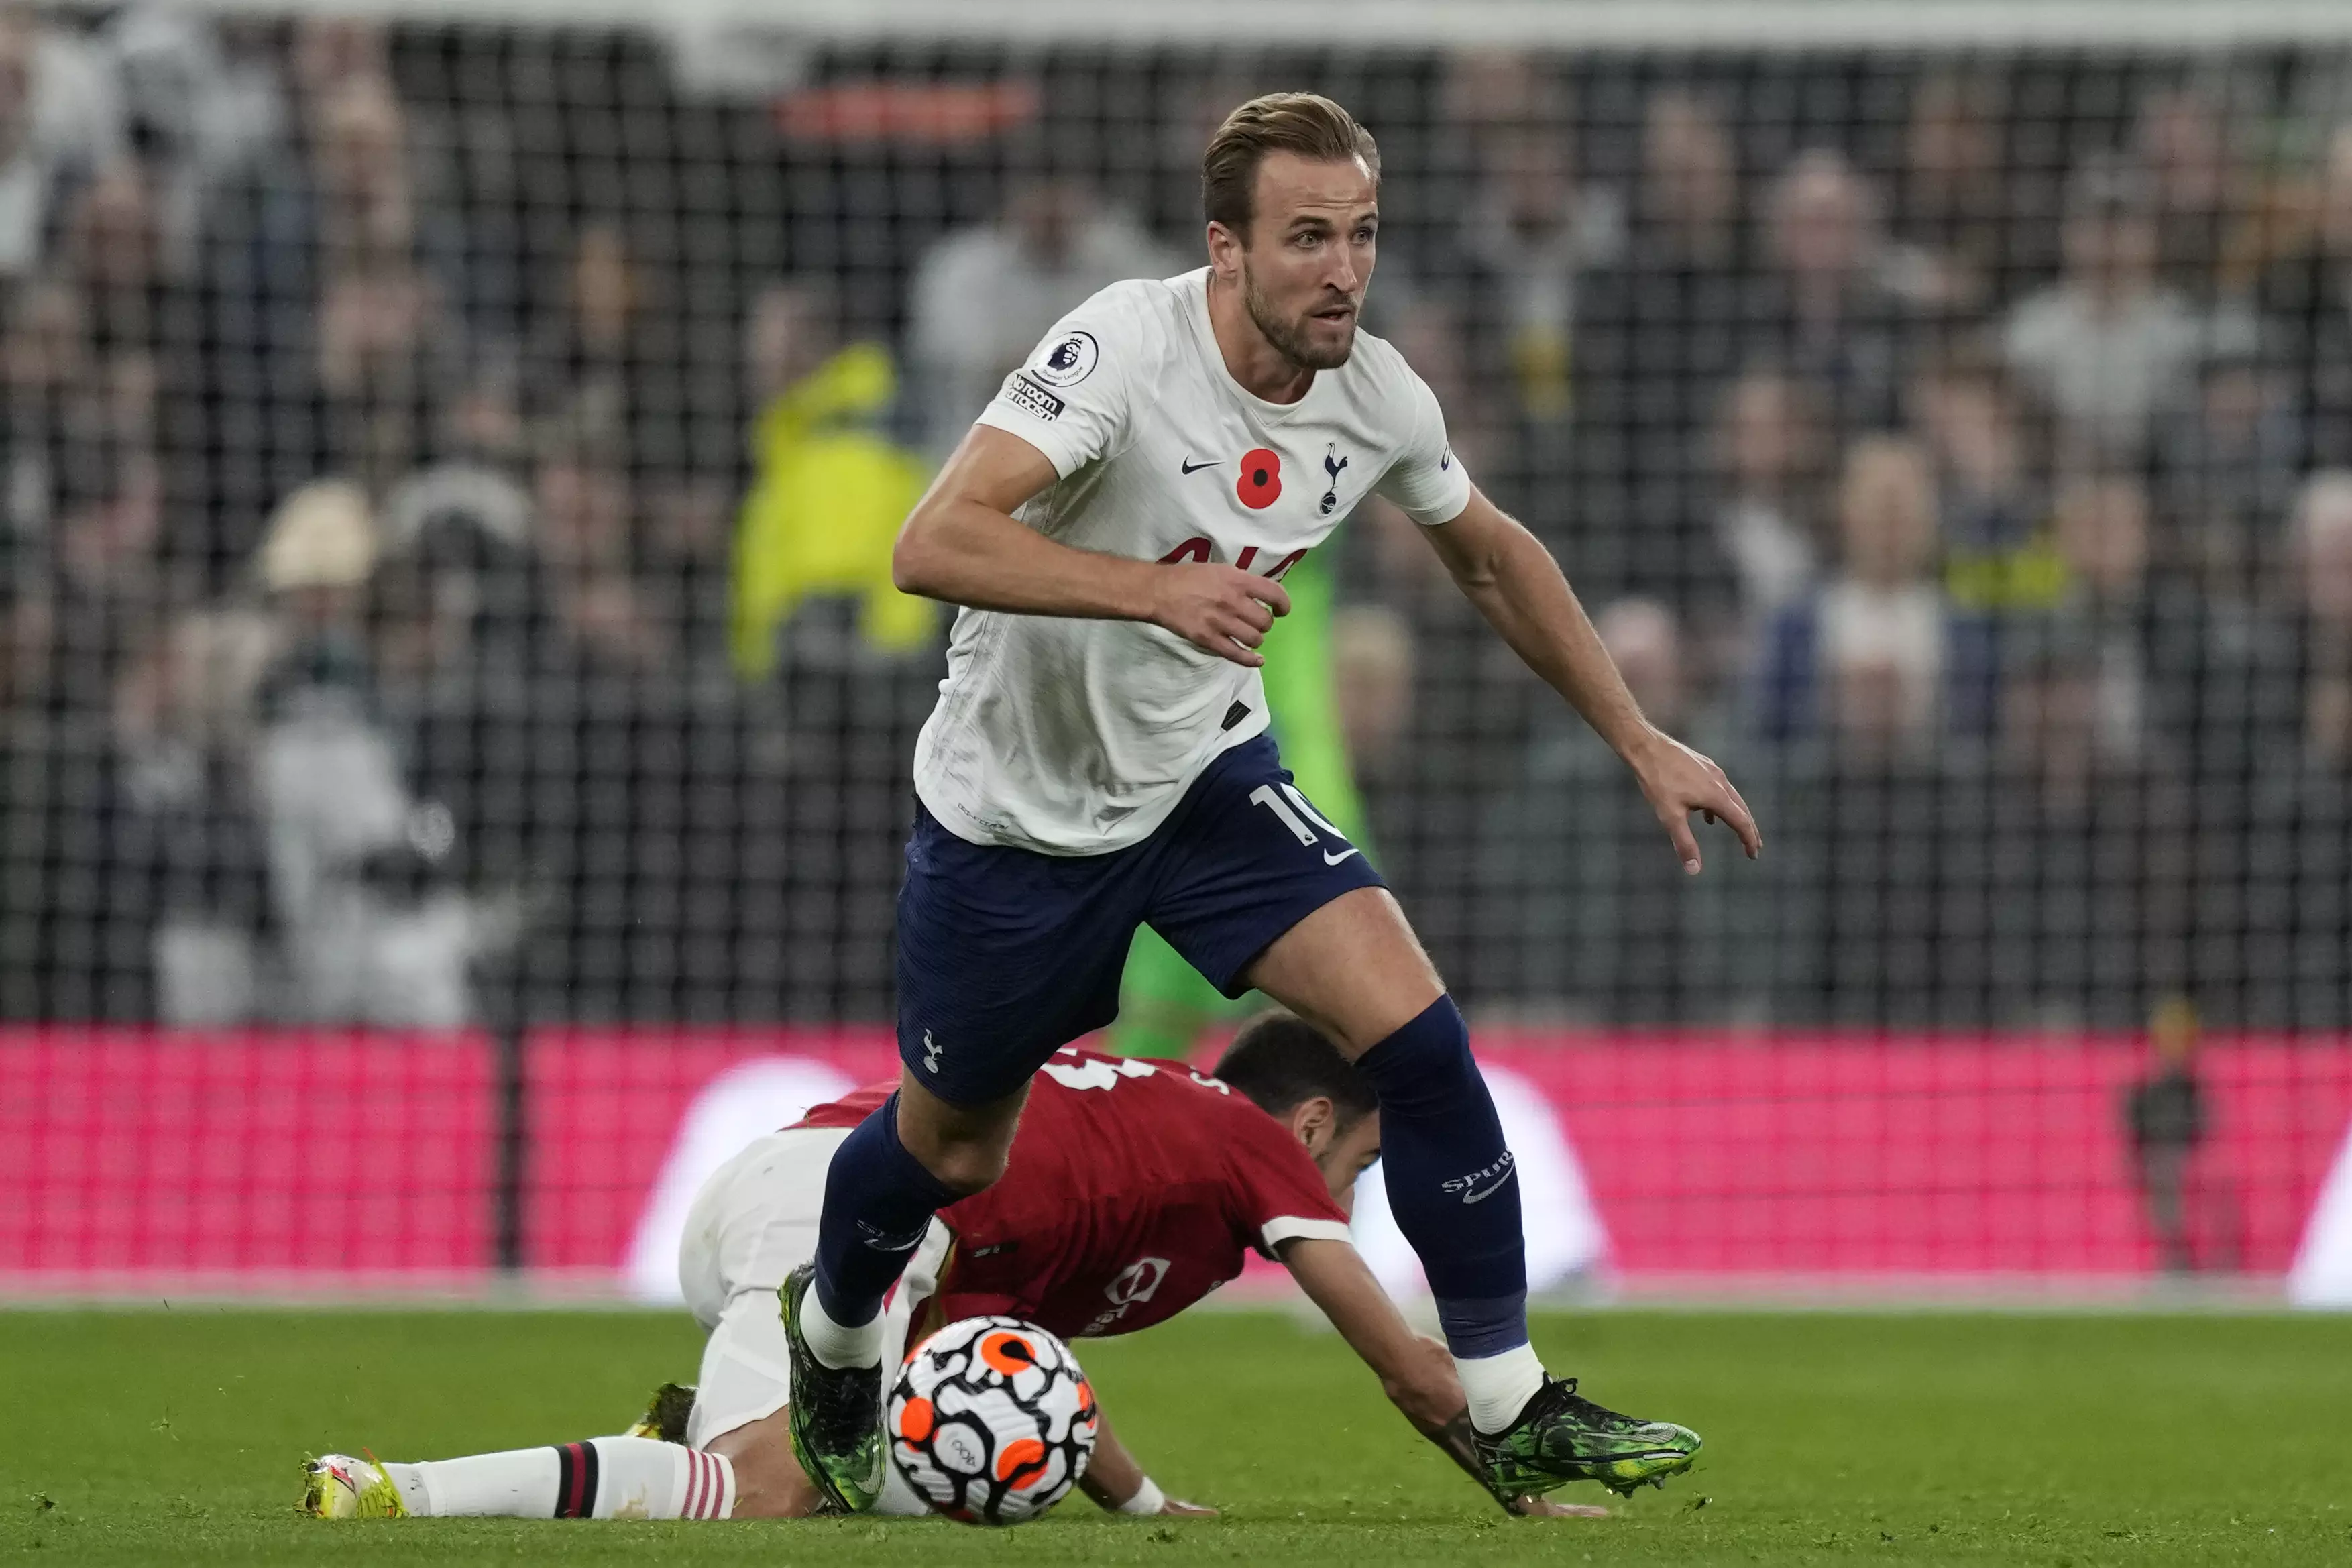 PA: Harry Kane is the most valuable player in the Premier League, according to transfermarkt.